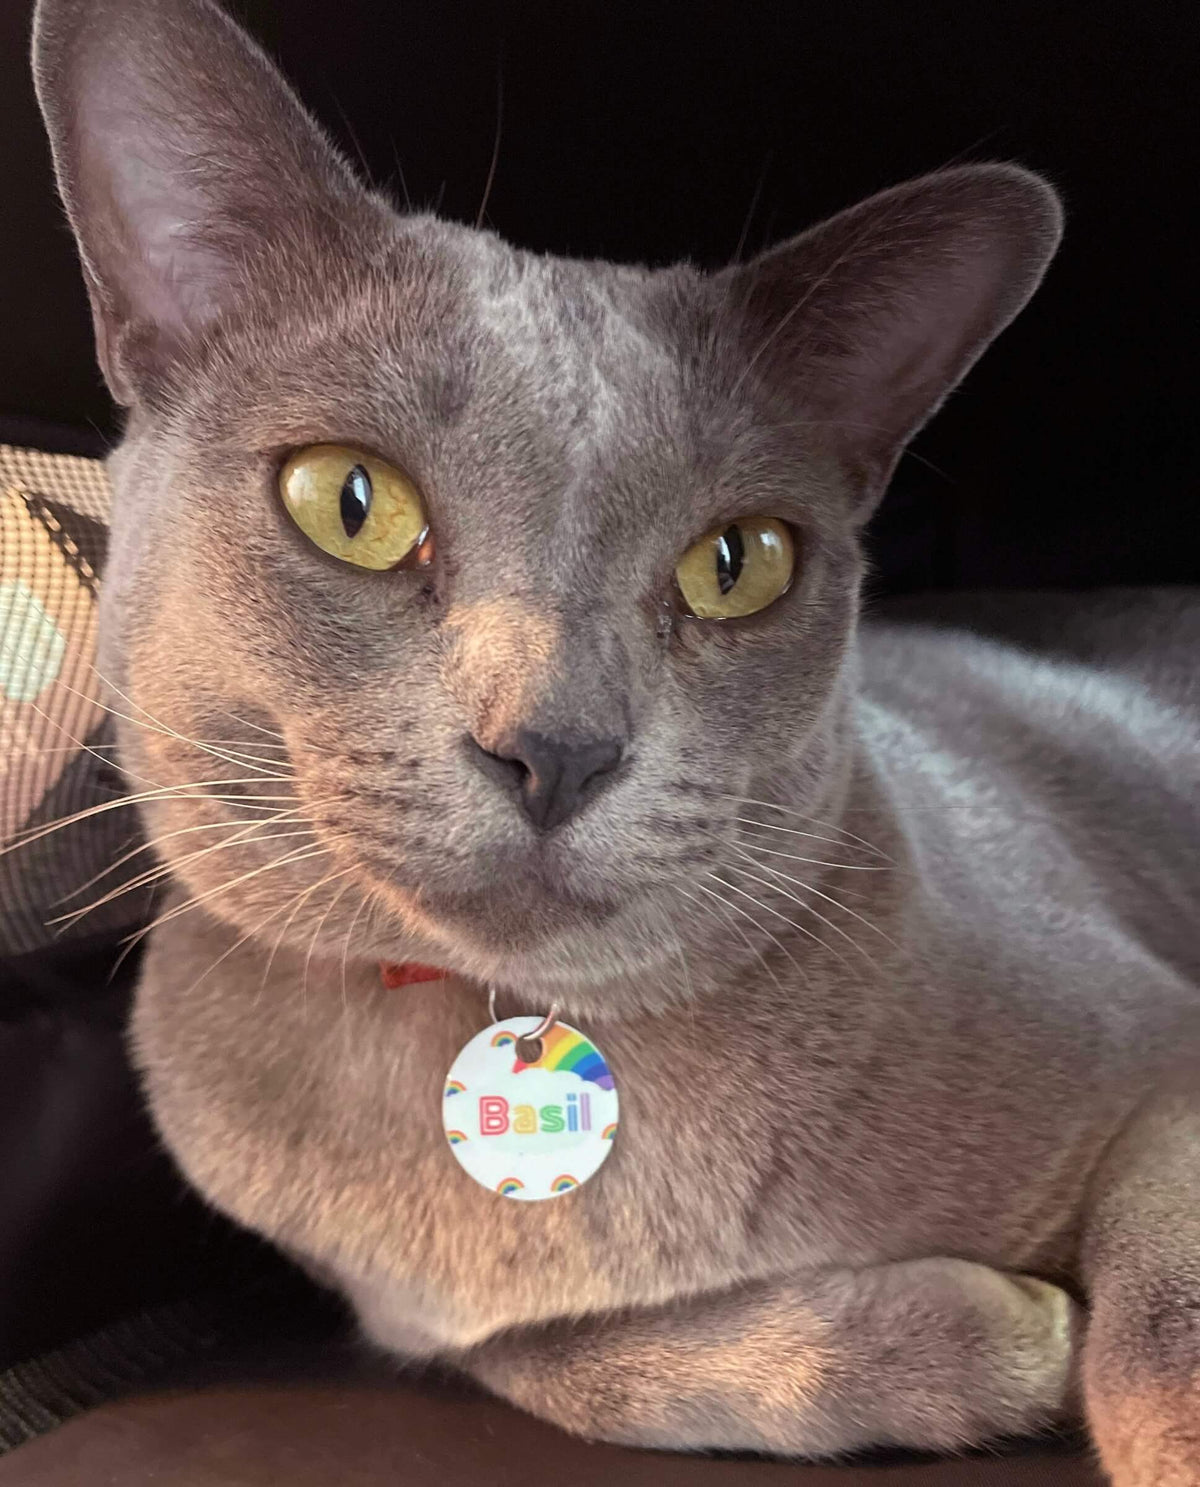 Haluna Happy Names&#39; &#39;End of the Rainbow&#39; 25mm aluminium name tag lights up the chest of a gorgeous grey cat who looks solemnly straight at the camera